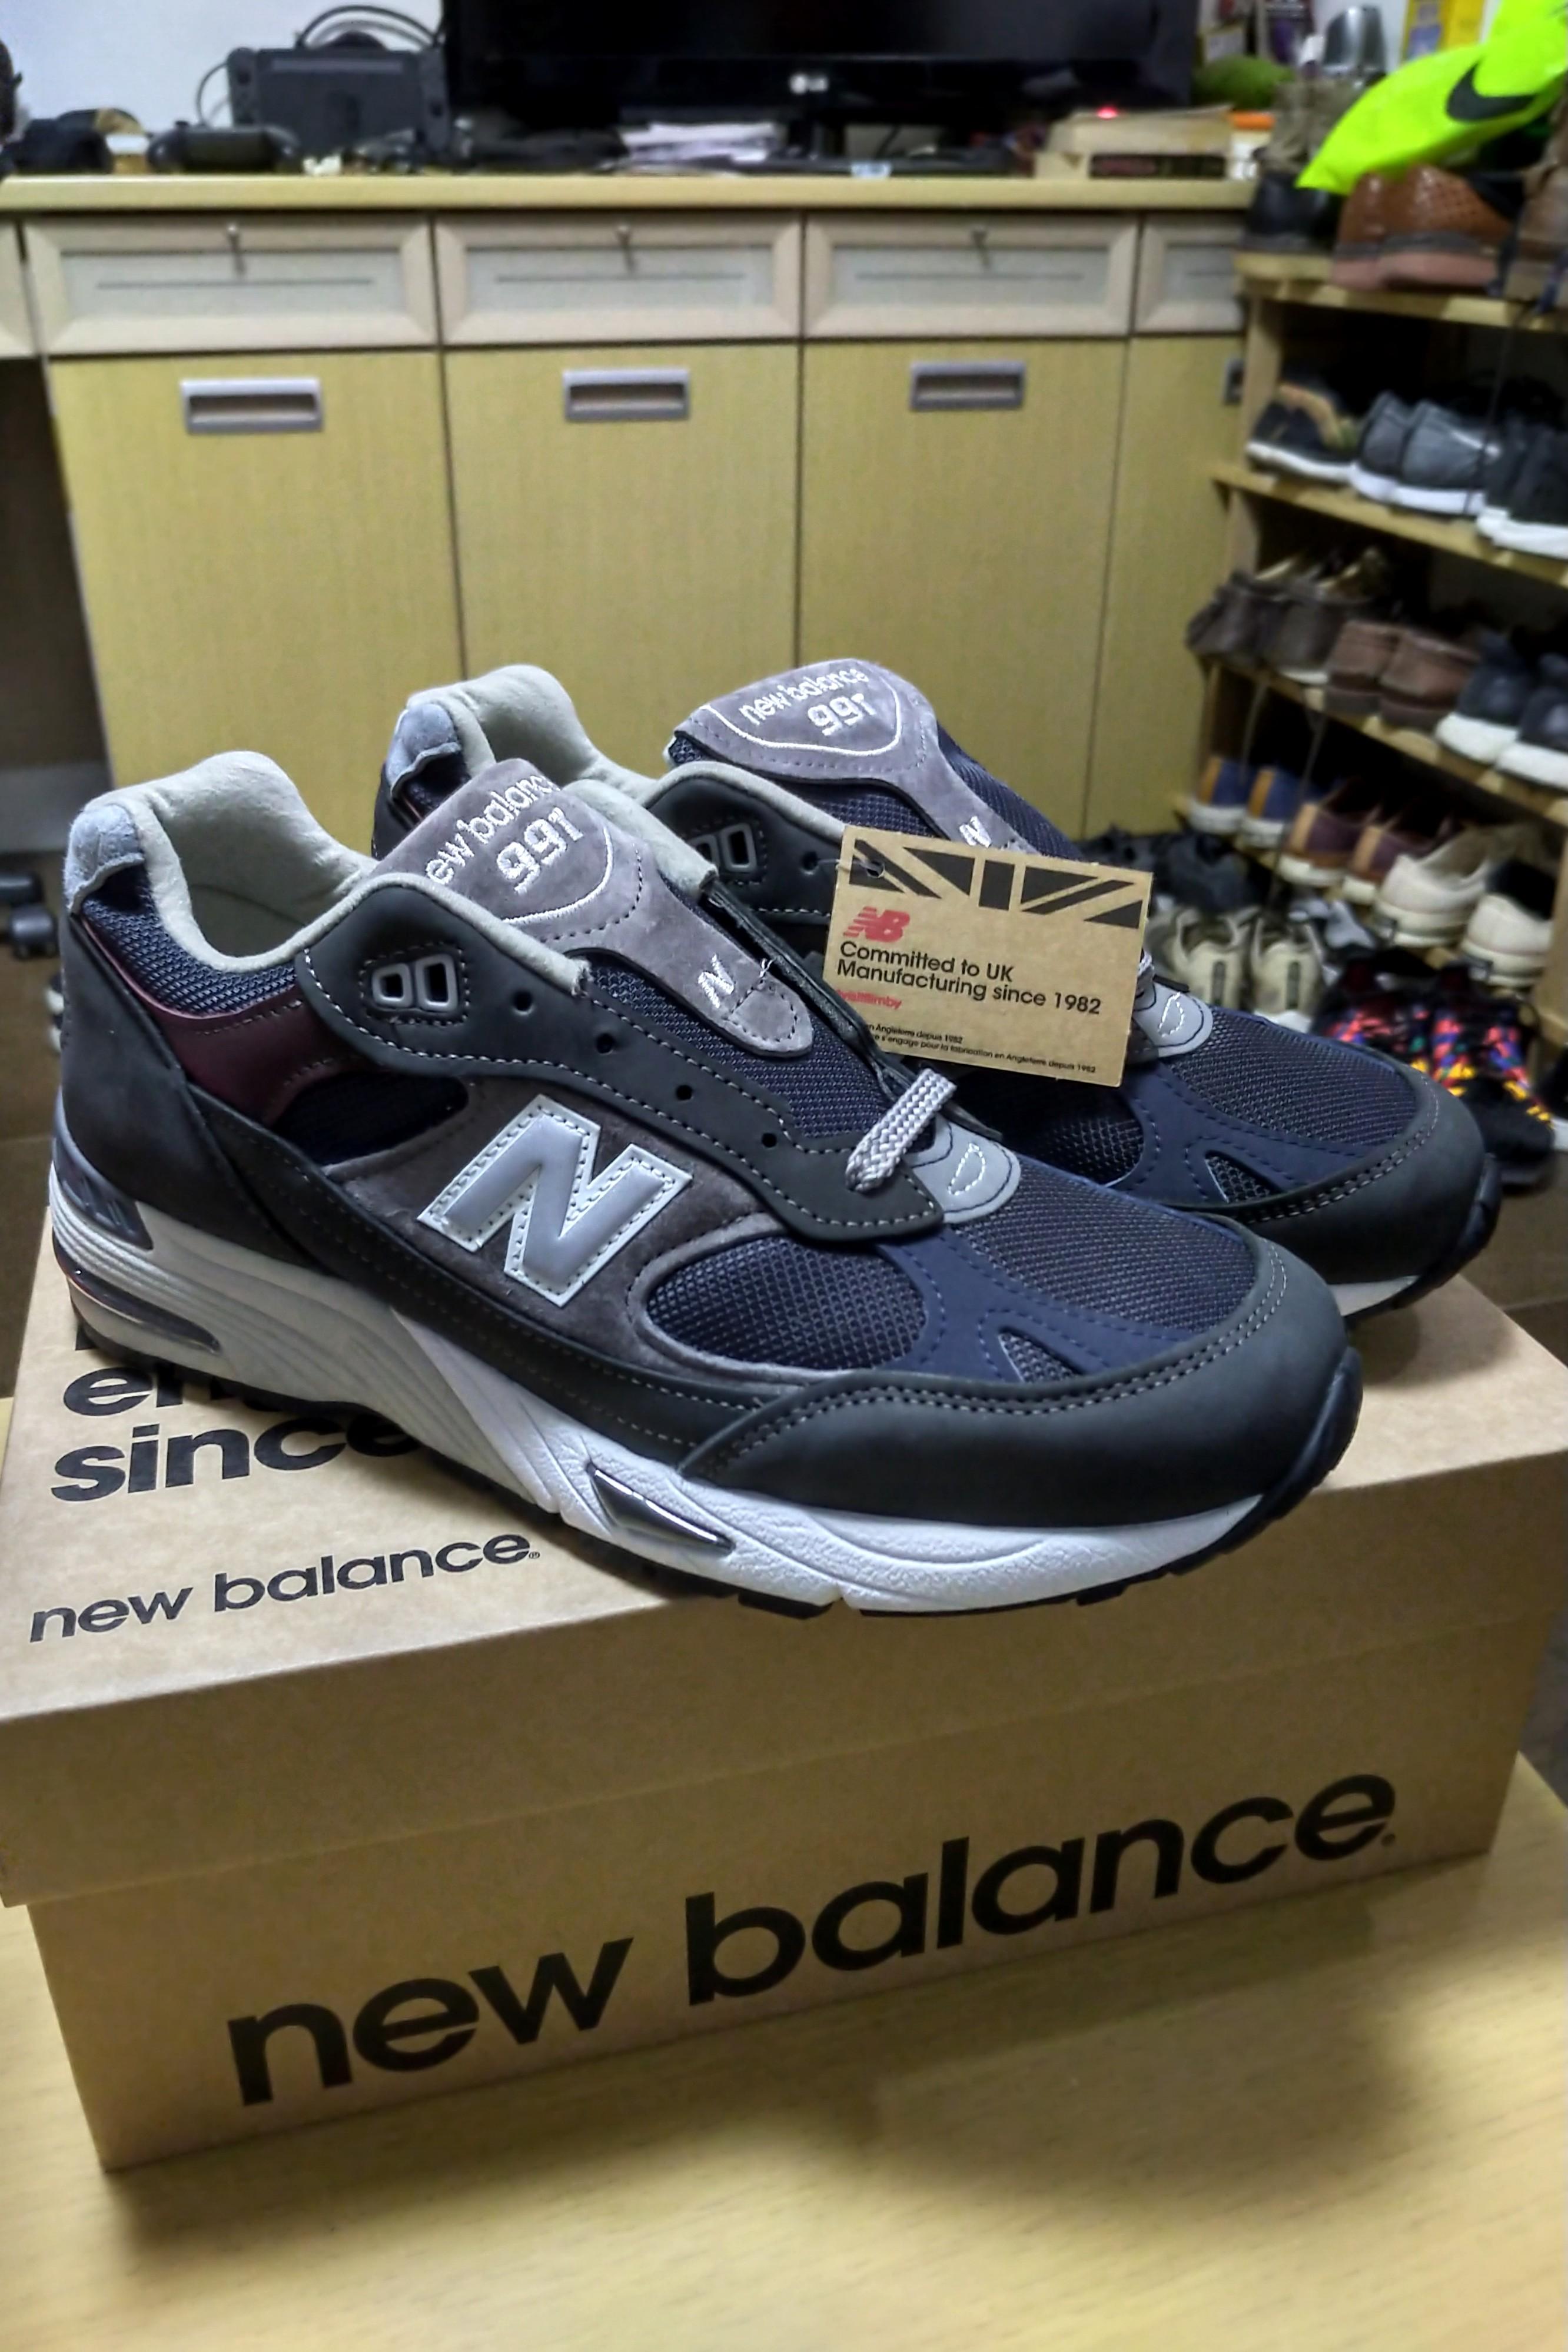 new balance stores in my area